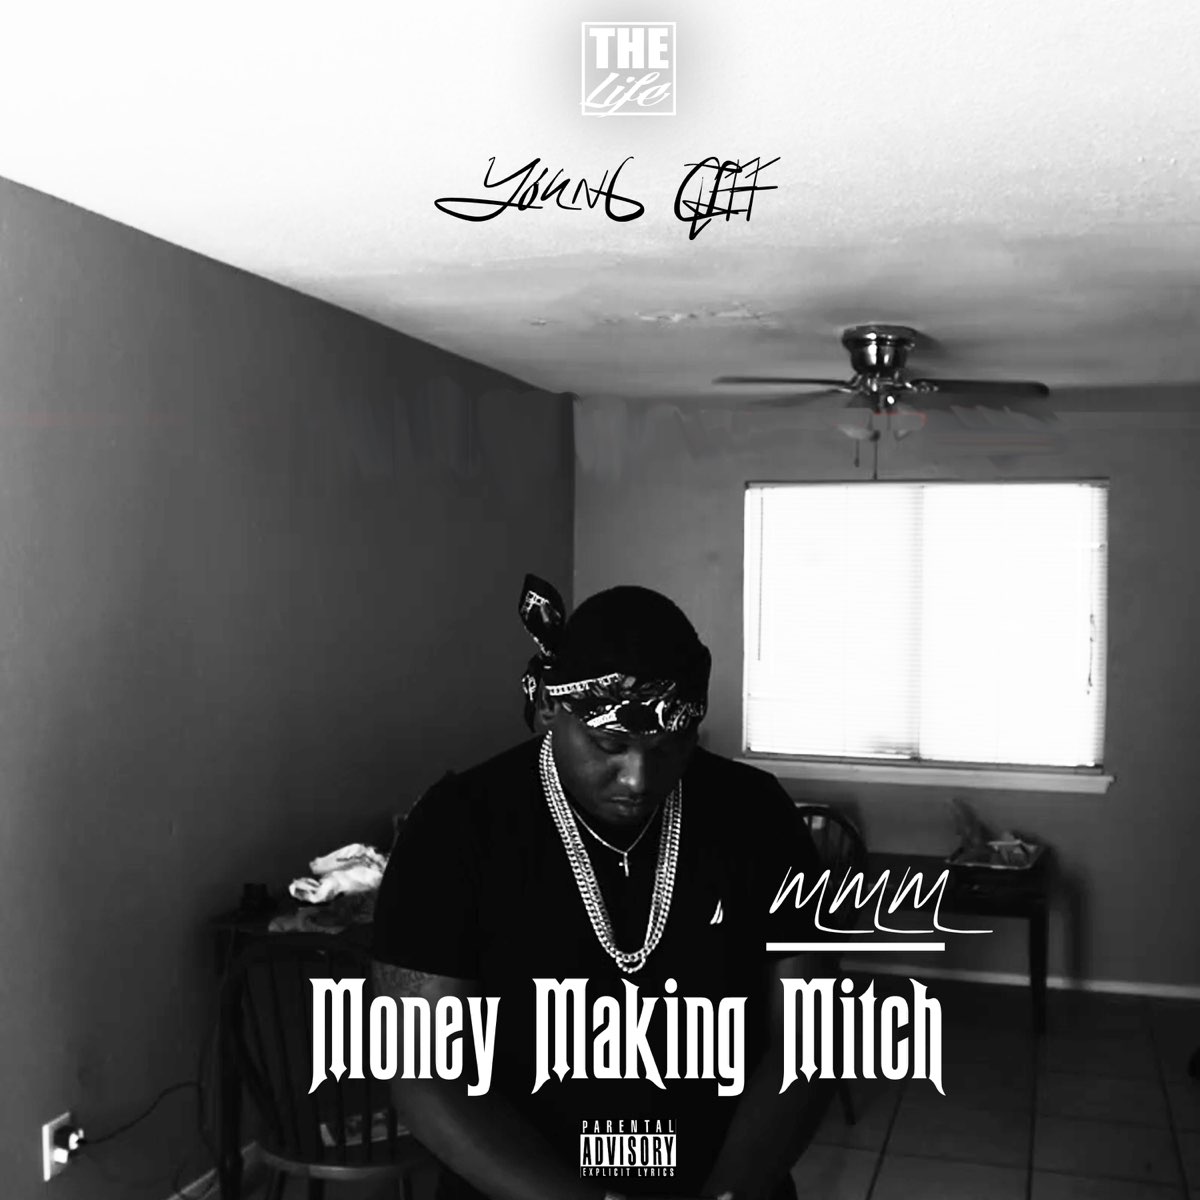 Money Making Mitch - Single - Album by YOUNG CLIFF - Apple Music